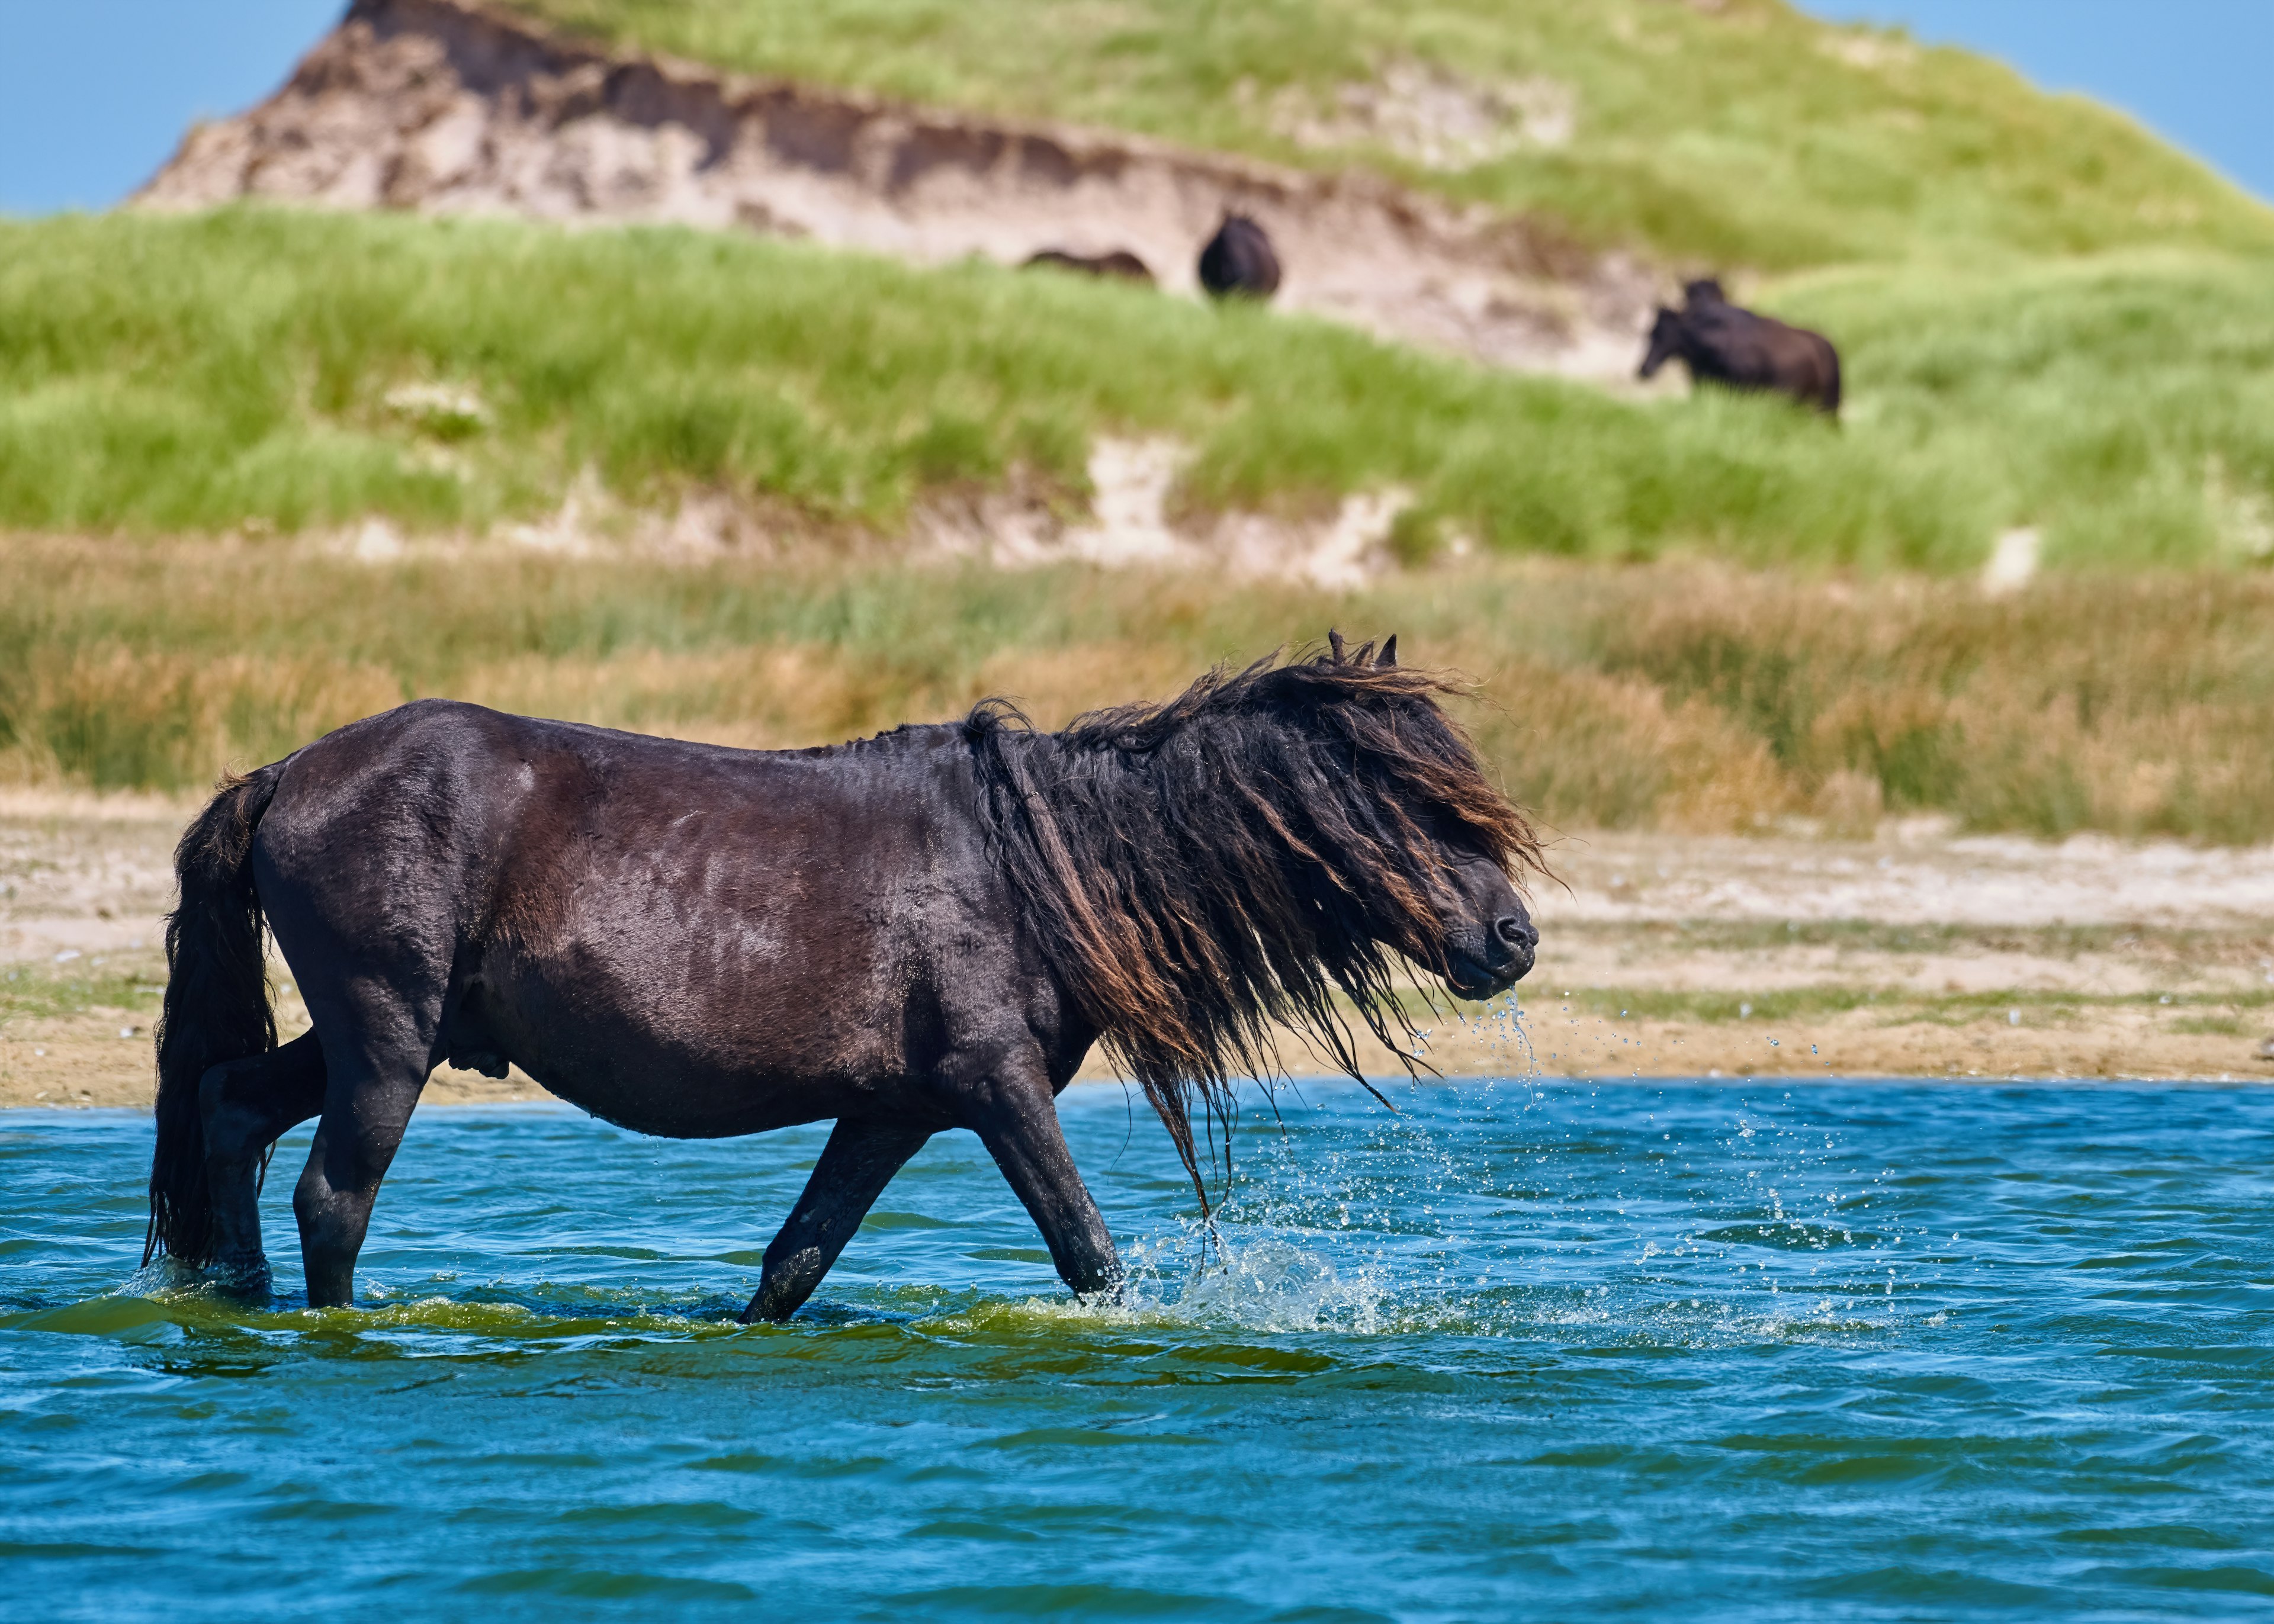 Wild horse in the water at Sable Island in Nova Scotia.